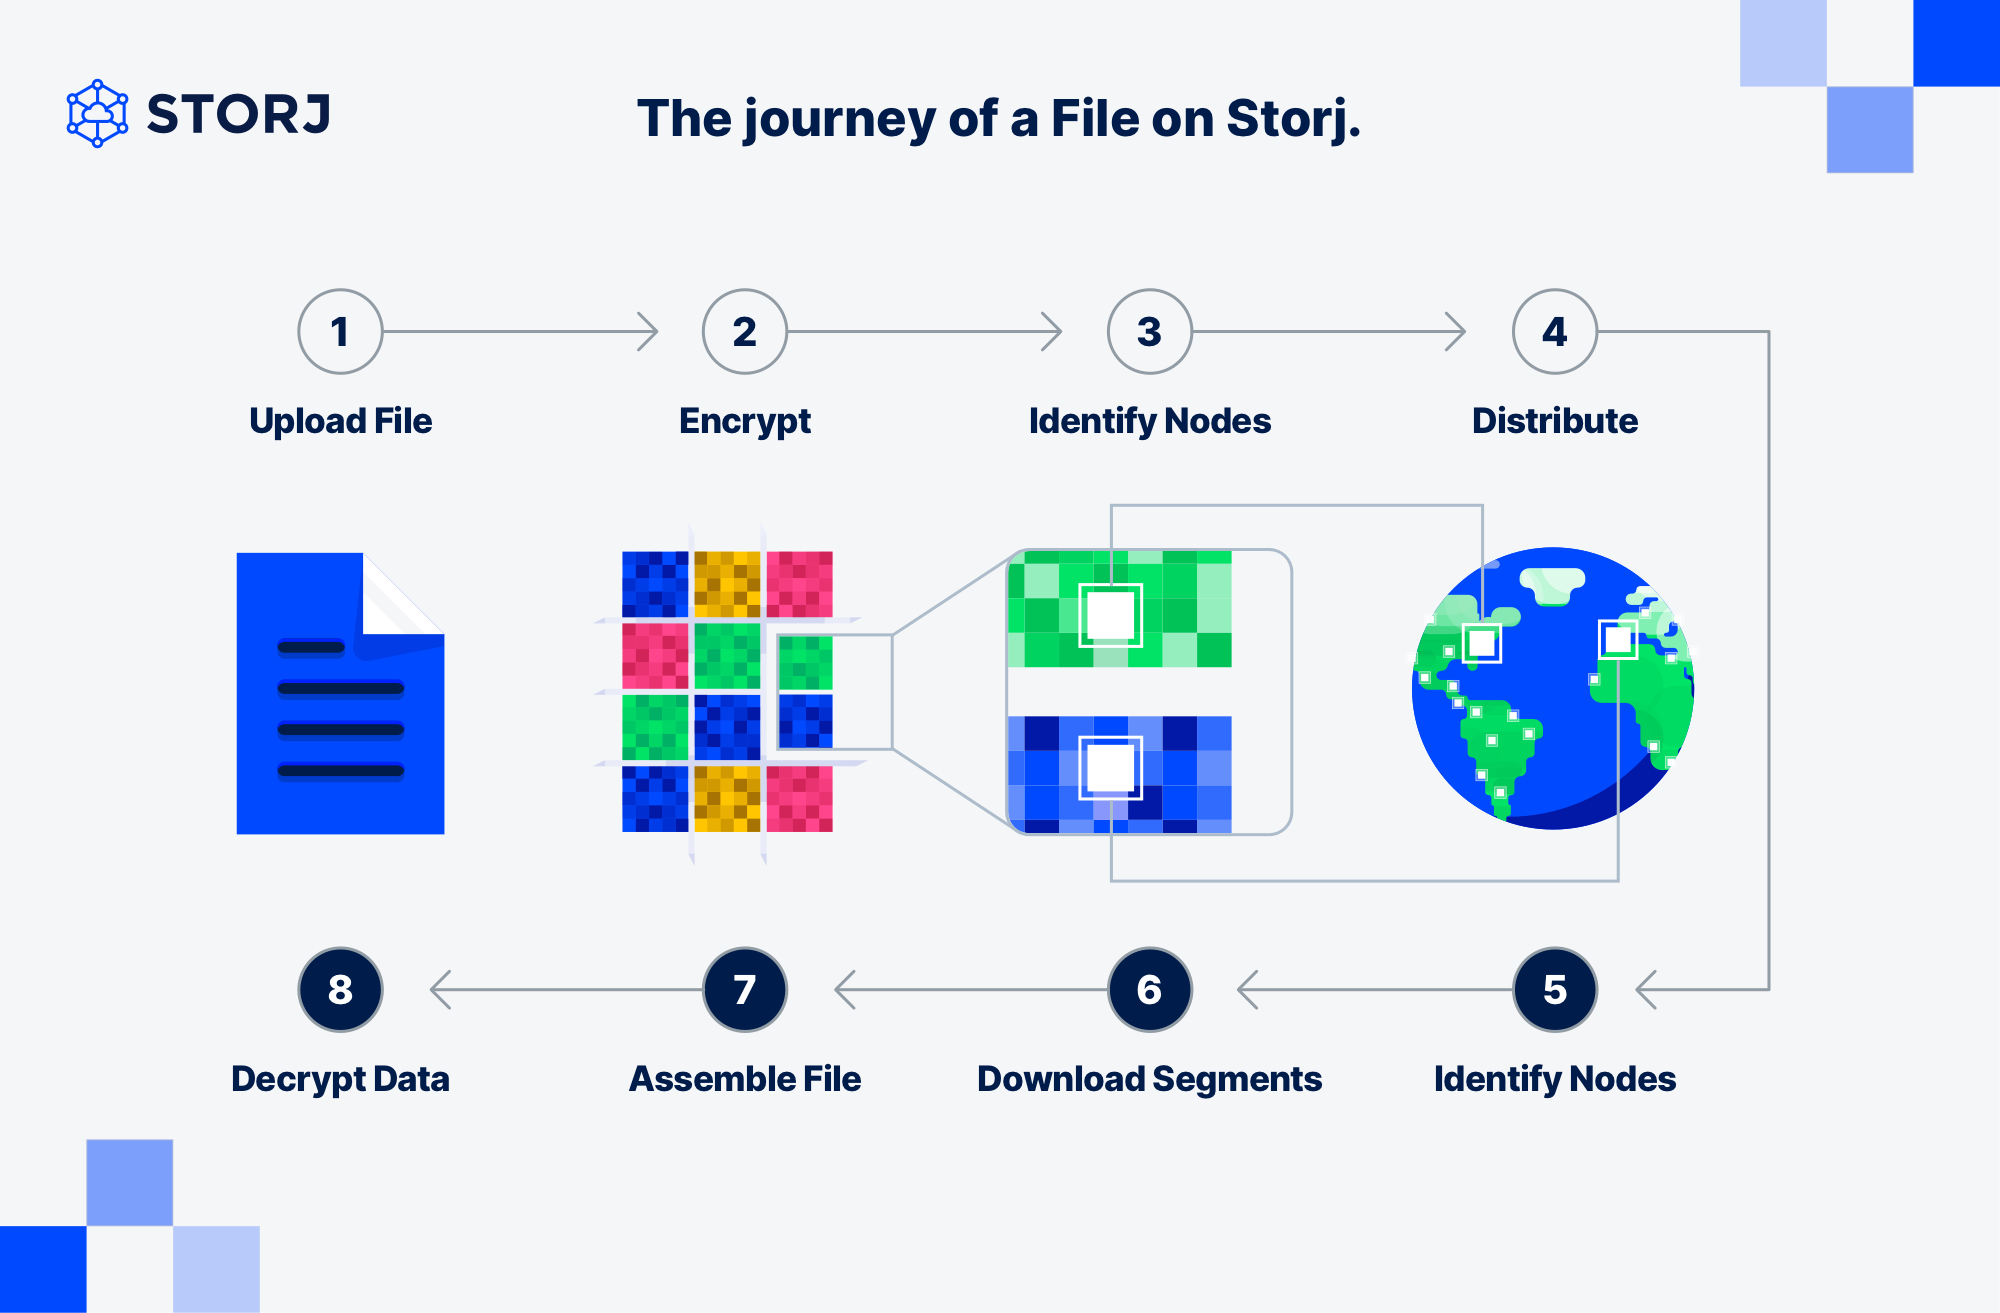 The journey of a file on Storj